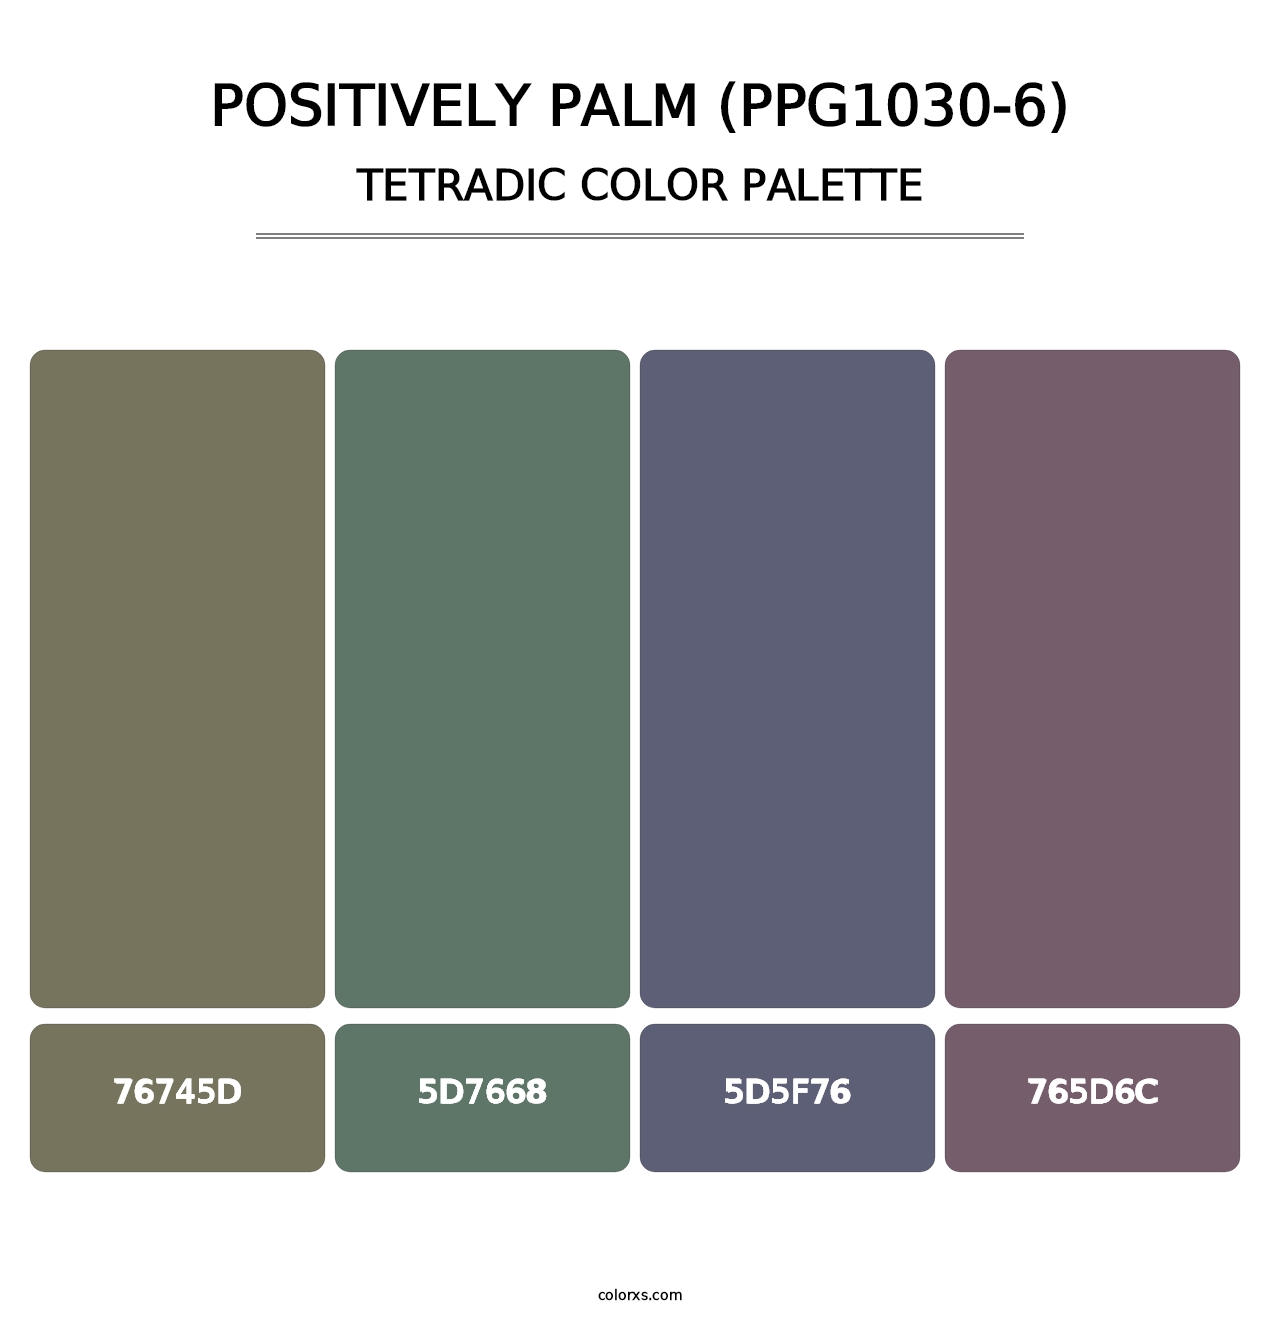 Positively Palm (PPG1030-6) - Tetradic Color Palette